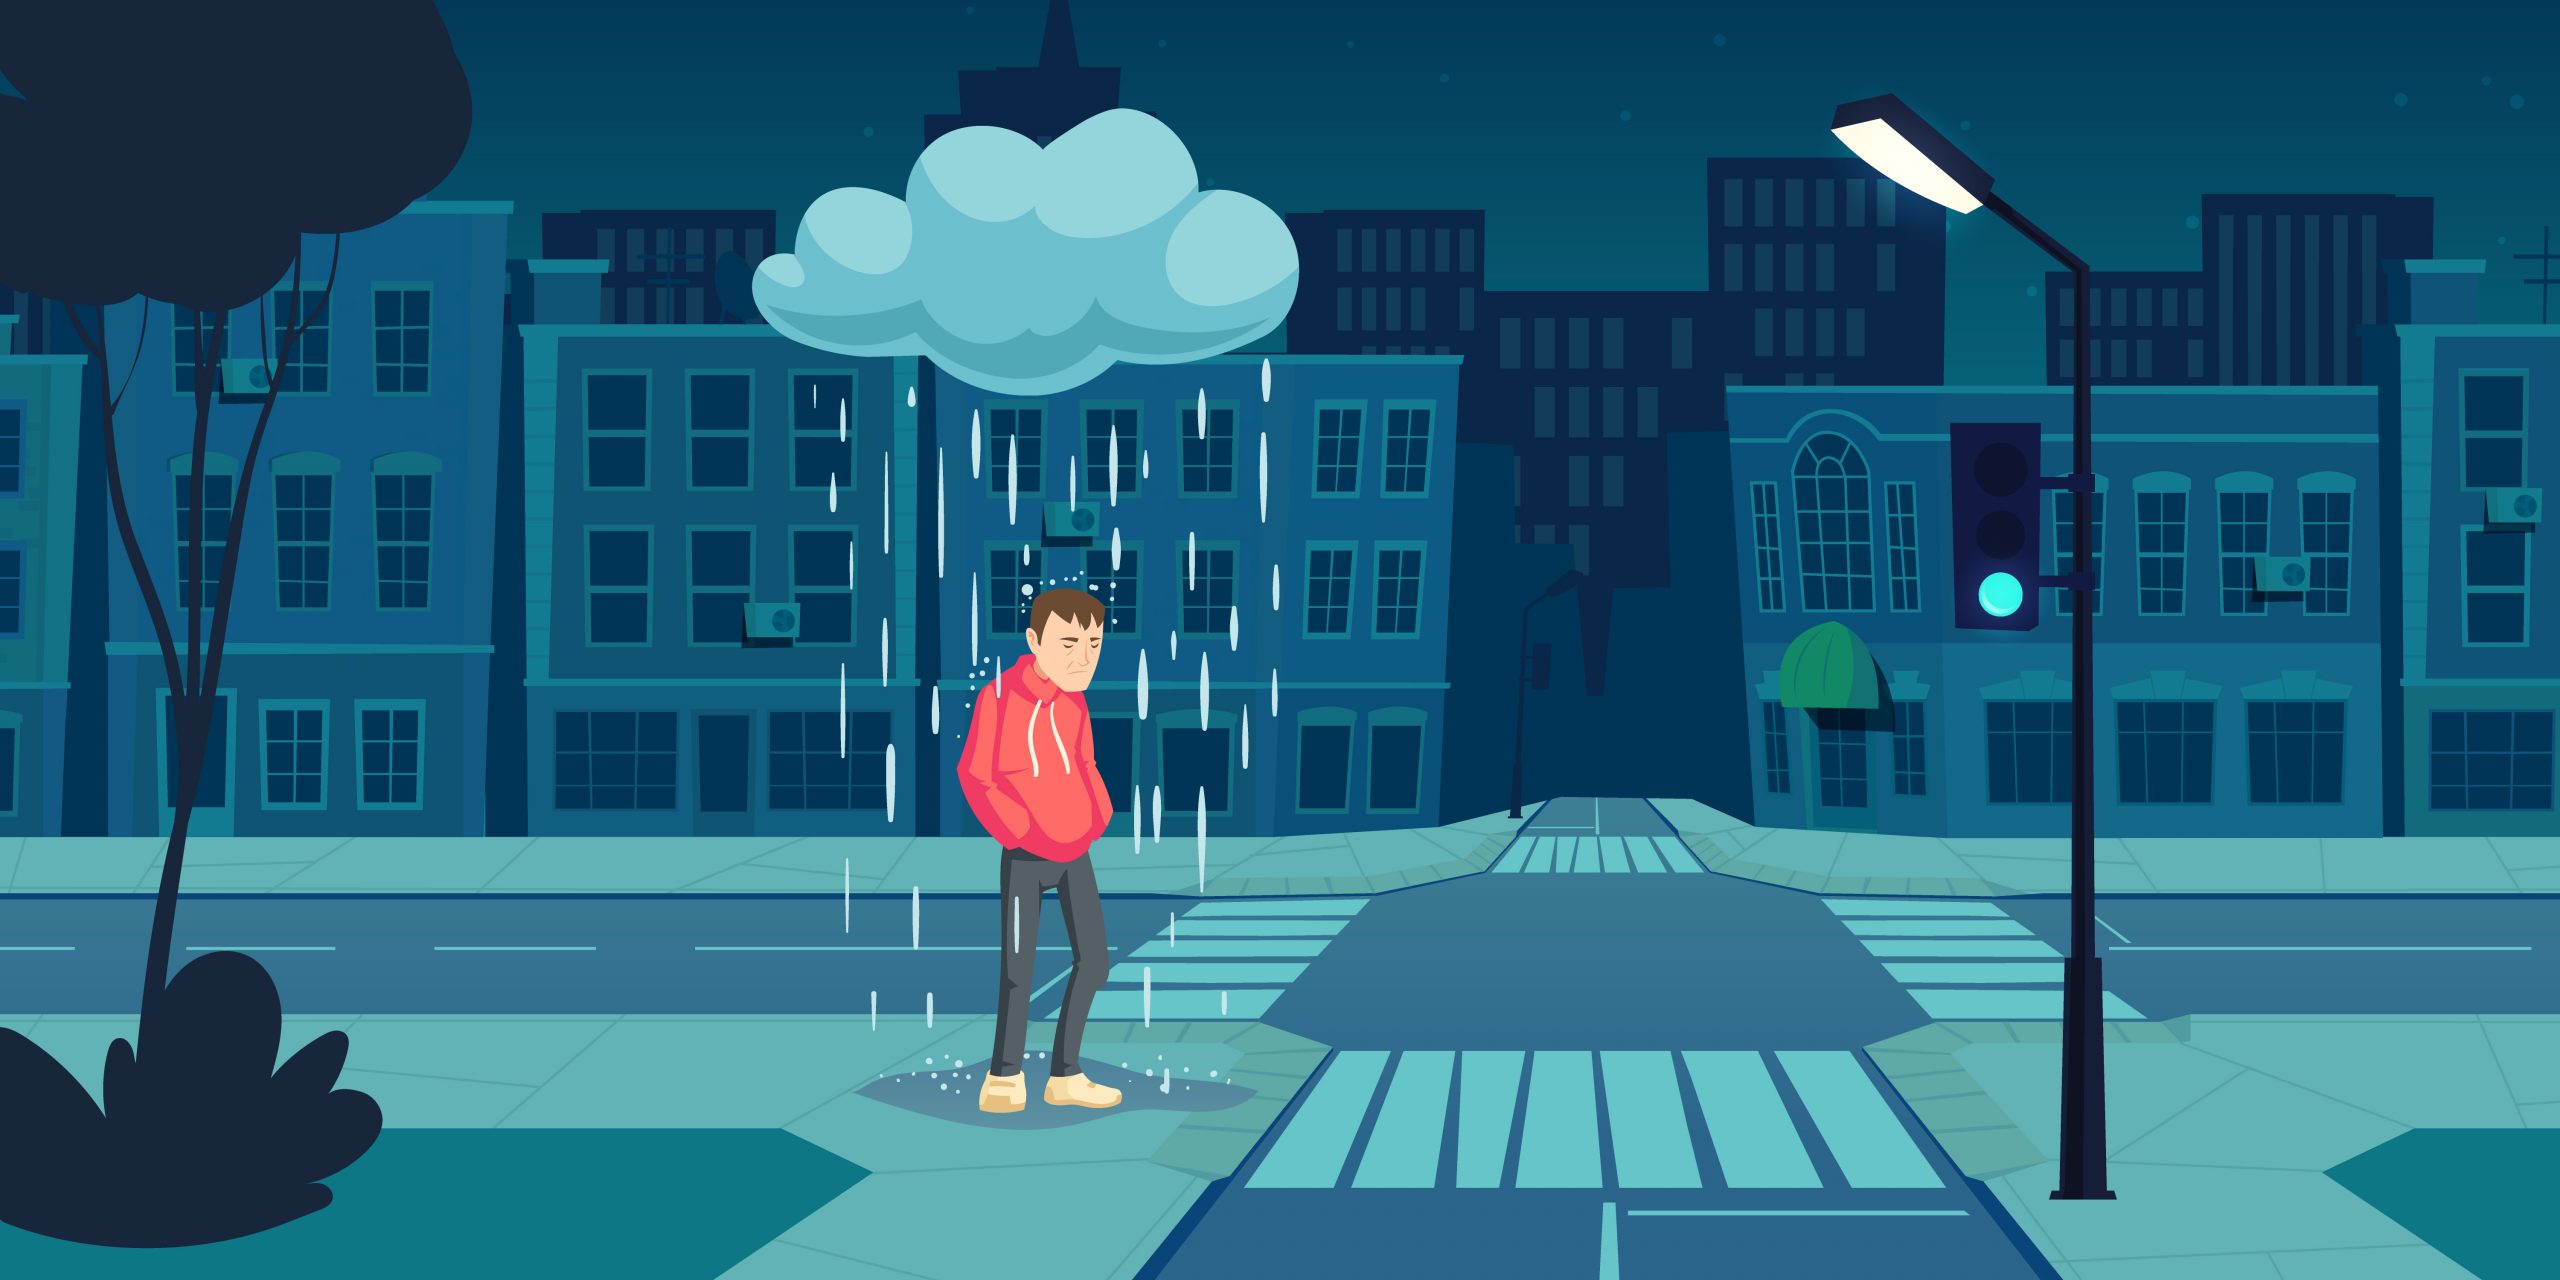 Depressed man stand under cloud with falling rain